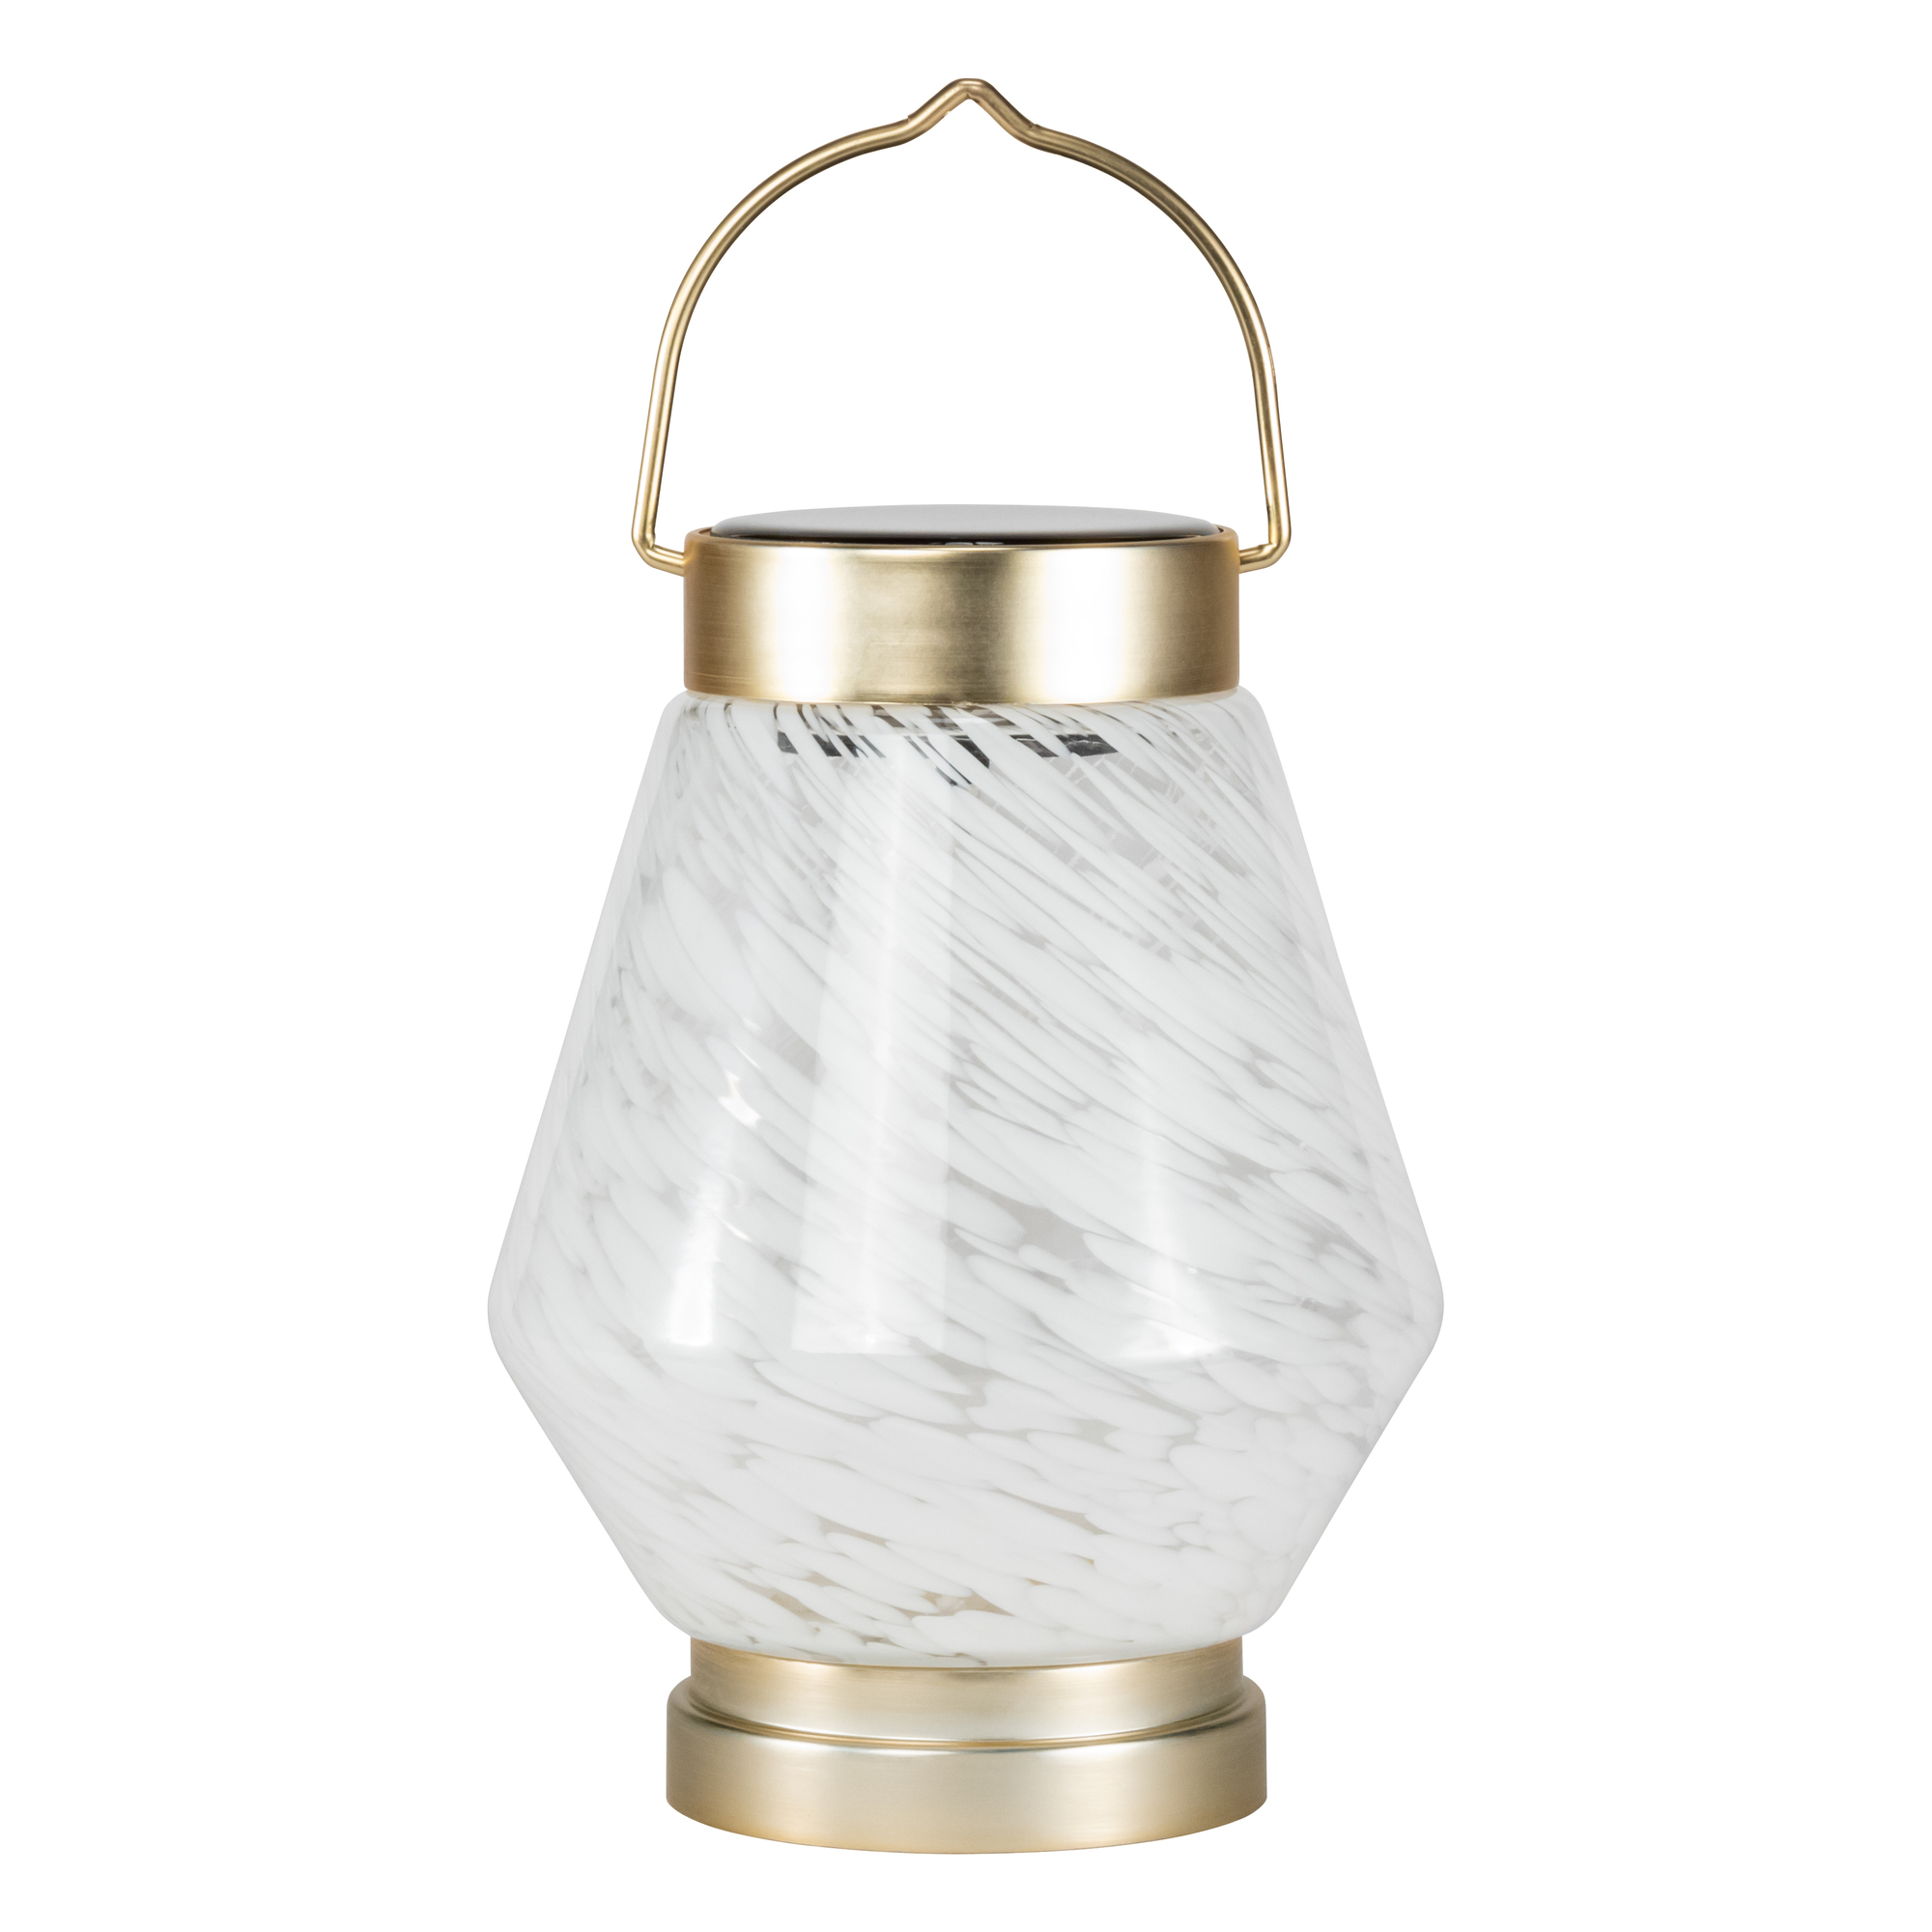 Allsop Home and Garden, Boaters Glass Solar Lantern - White Cone, Color White, Included (qty.) 1 Model 32410